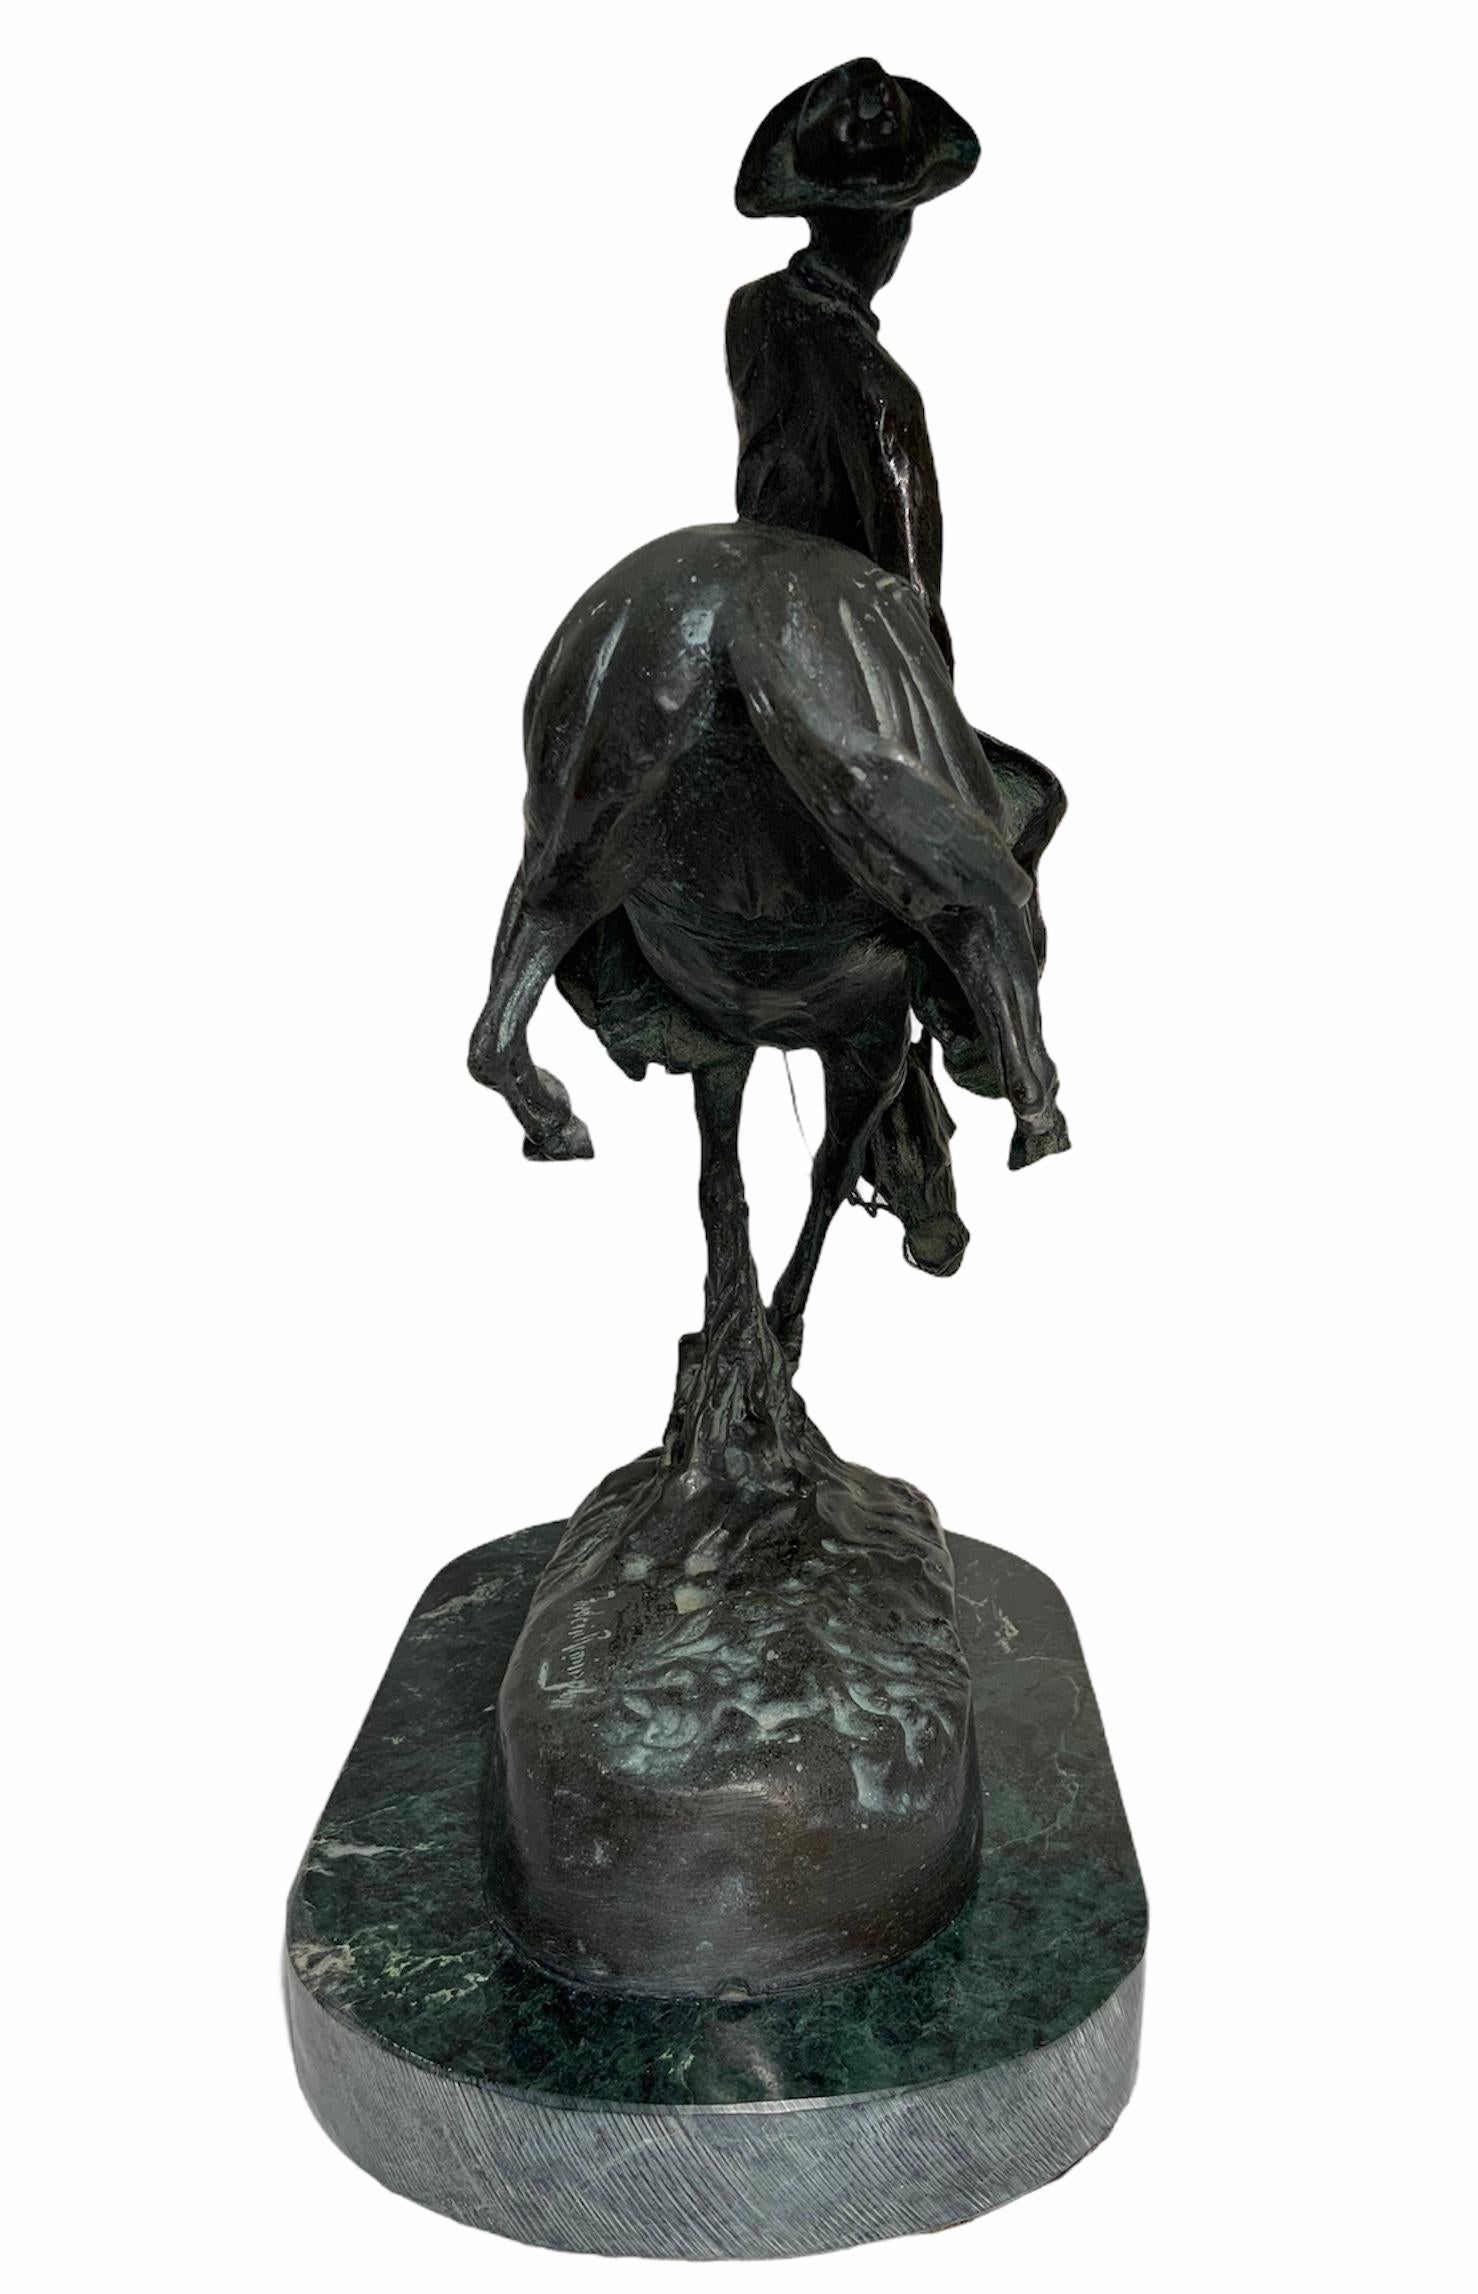 Cast Frederic Remington Patinated Bronze Sculpture “The Outlaw”